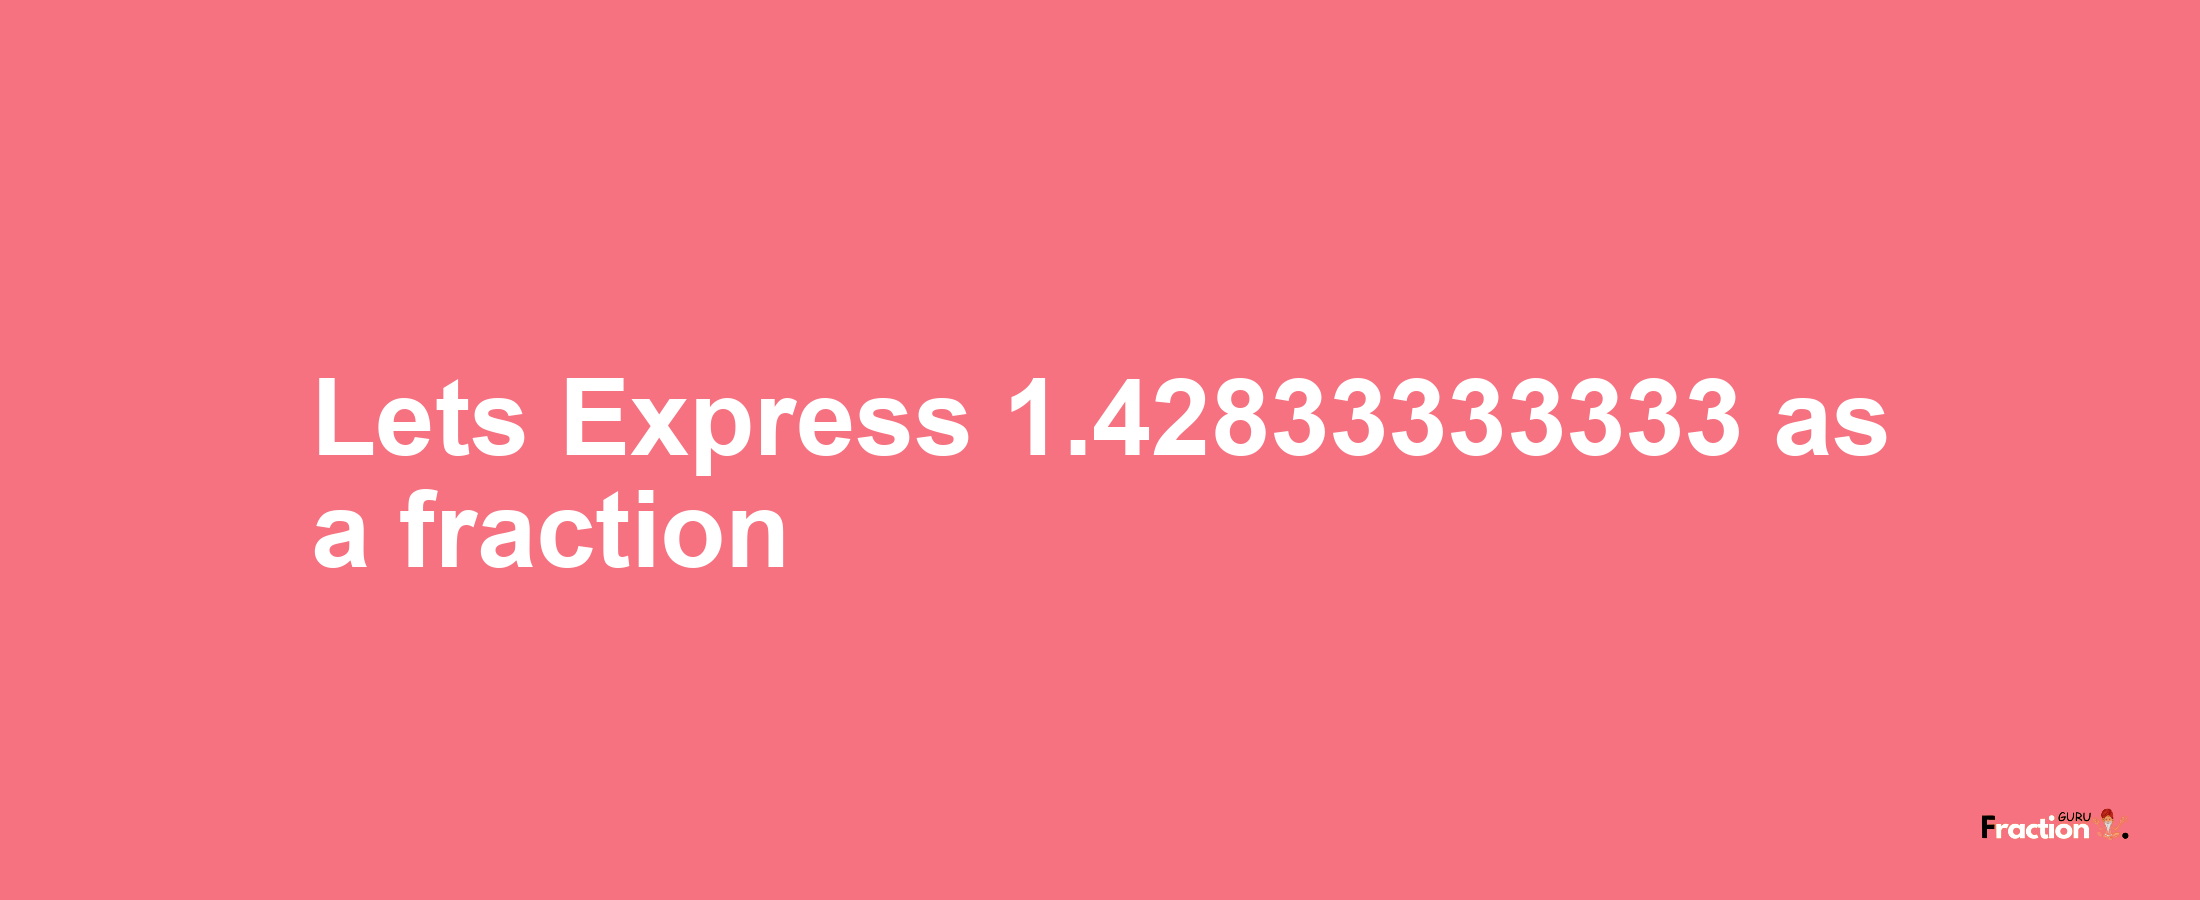 Lets Express 1.42833333333 as afraction